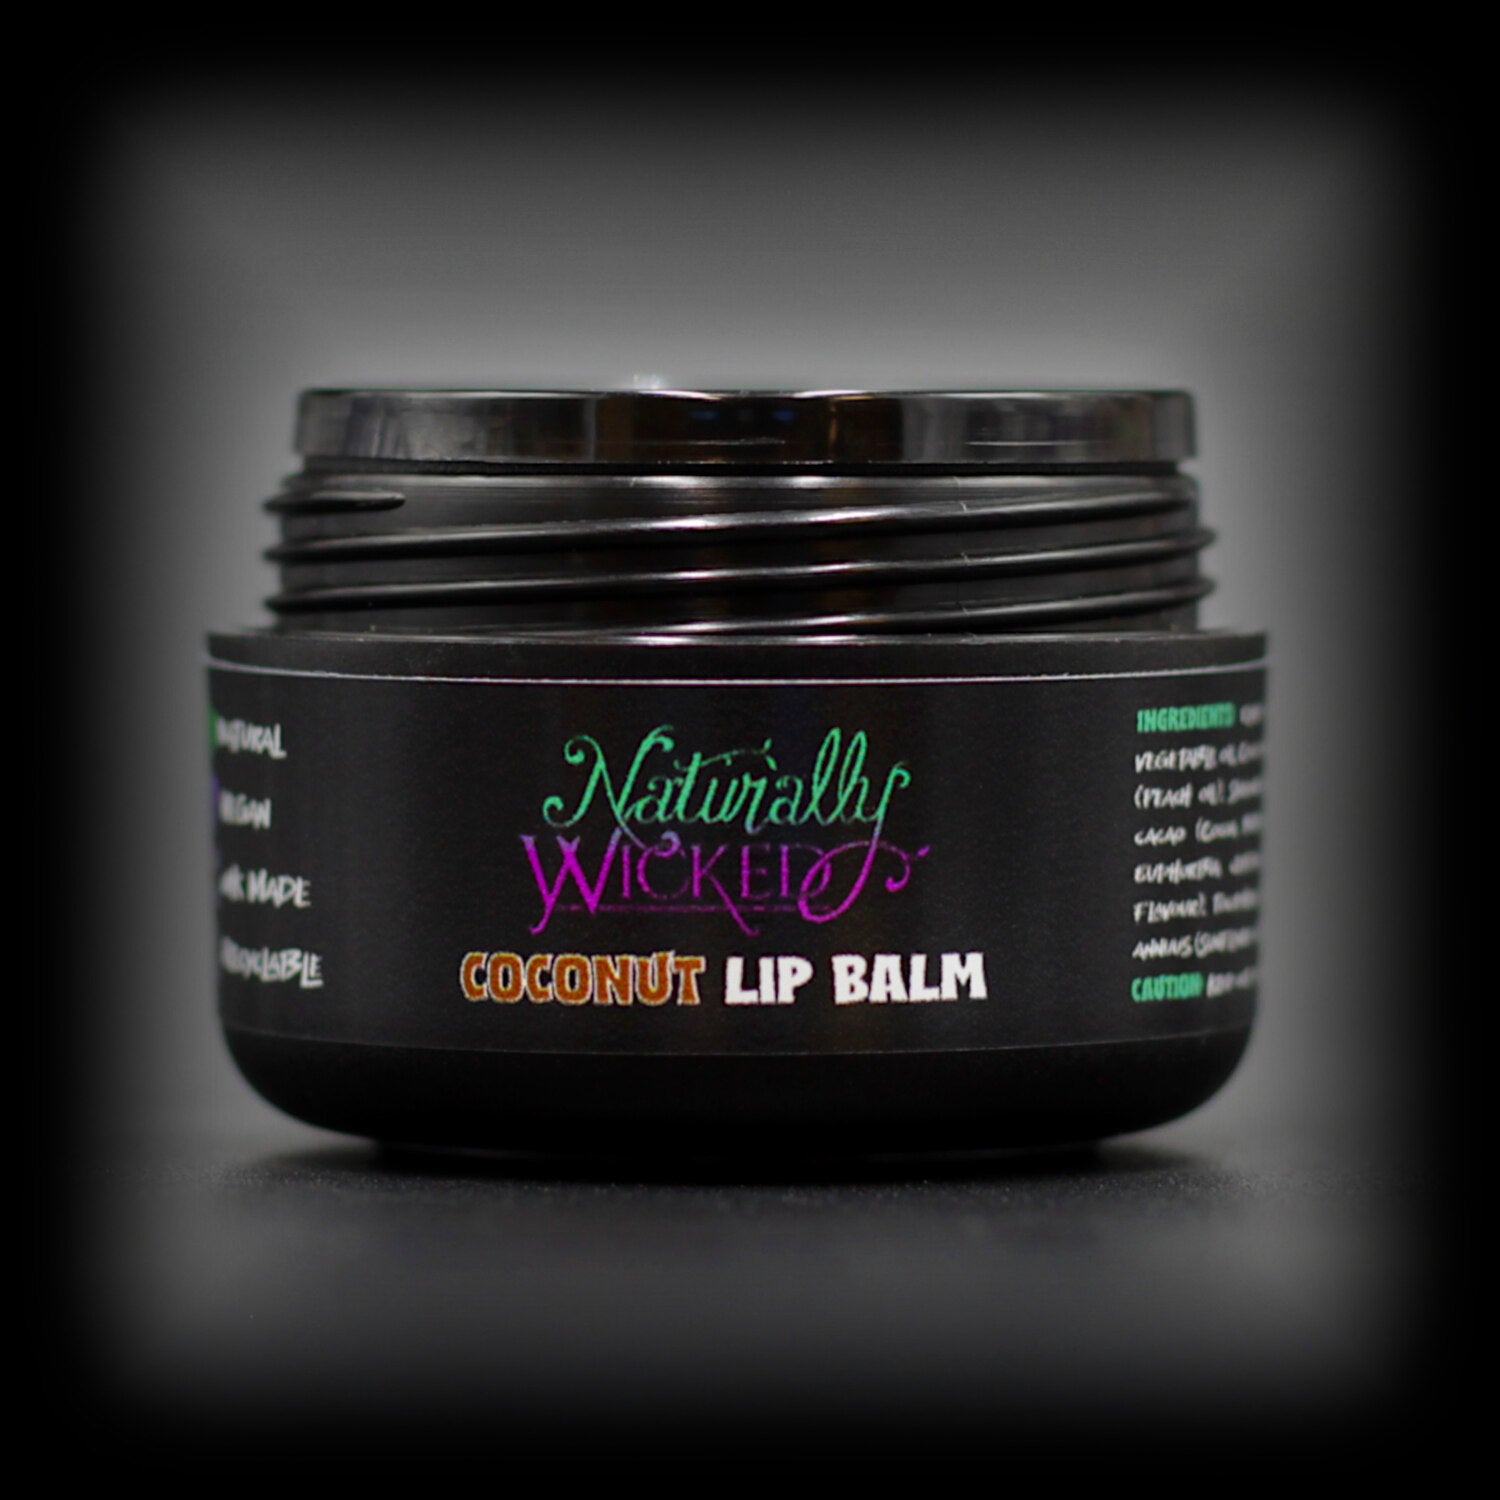 Naturally Wicked Coconut Lip Balm With No Lid Exposing Inner Luxury Seal